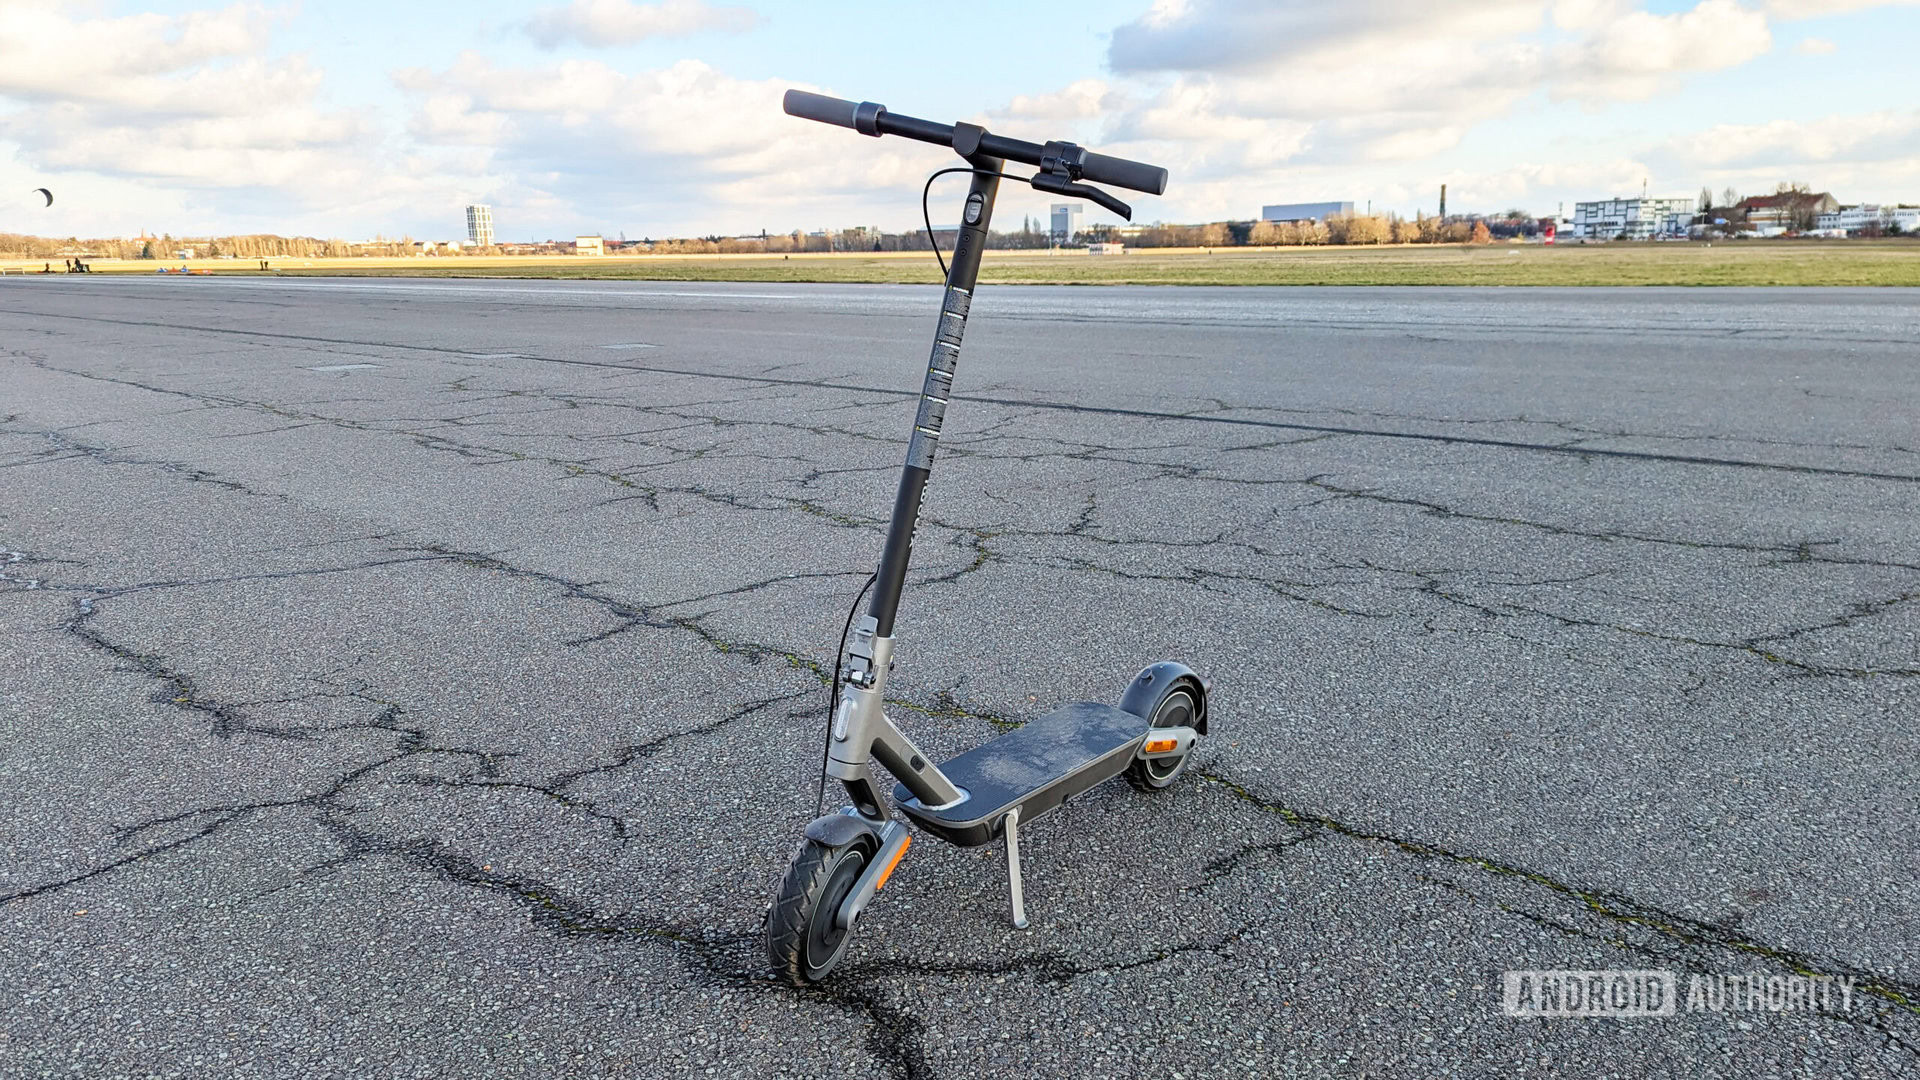 The BEST and WORST of the Xiaomi 4 ULTRA Scooter 🔥 TESTS and REVIEW 🛴 